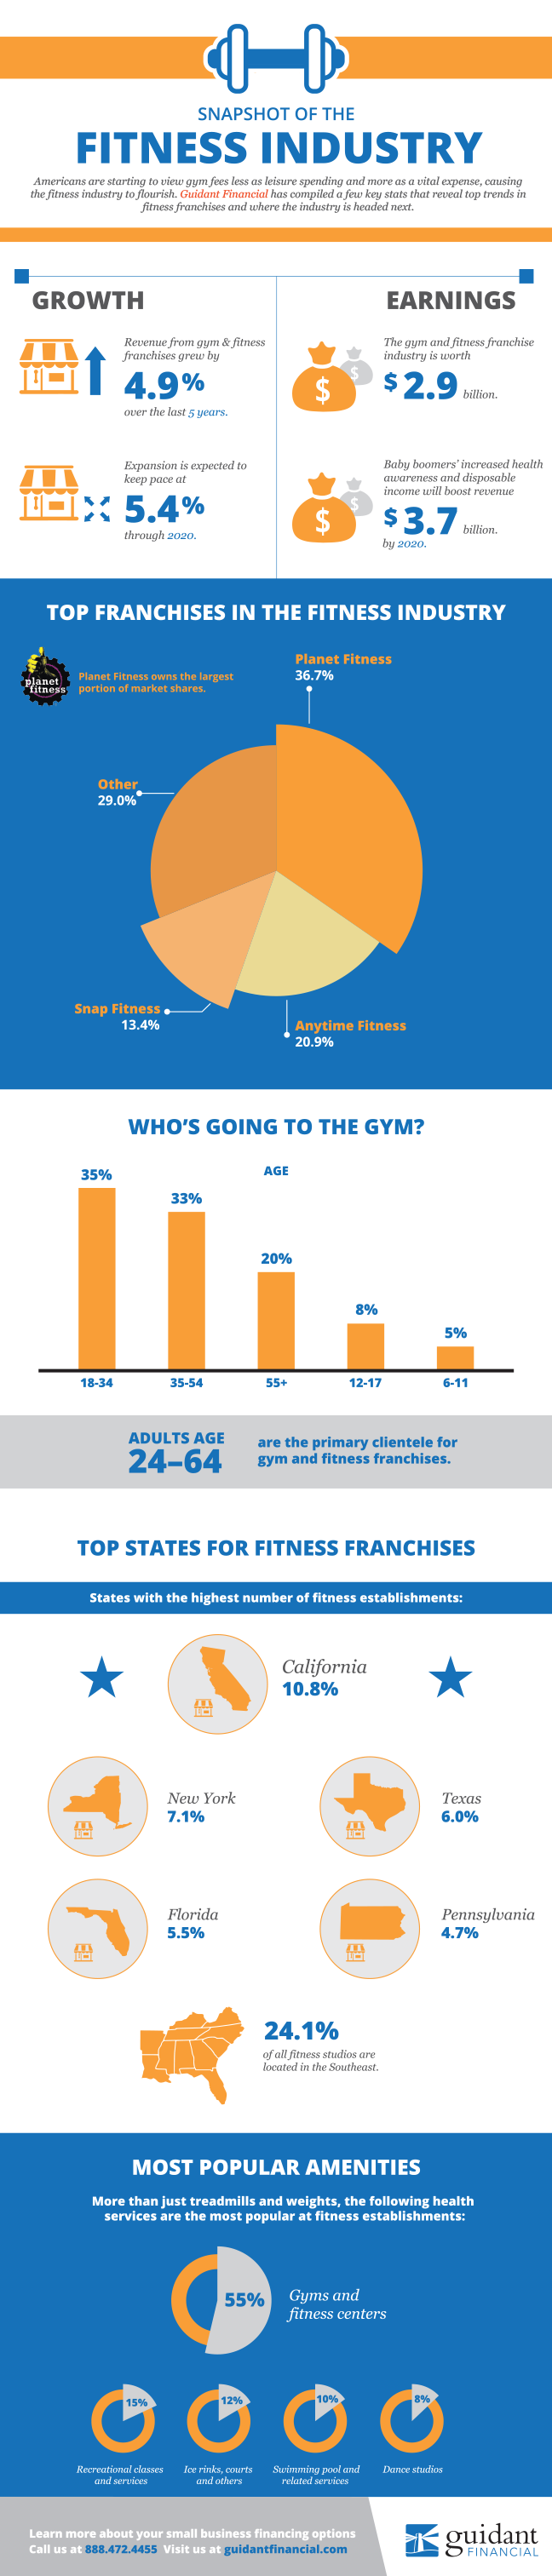 gym fitness industry infographic